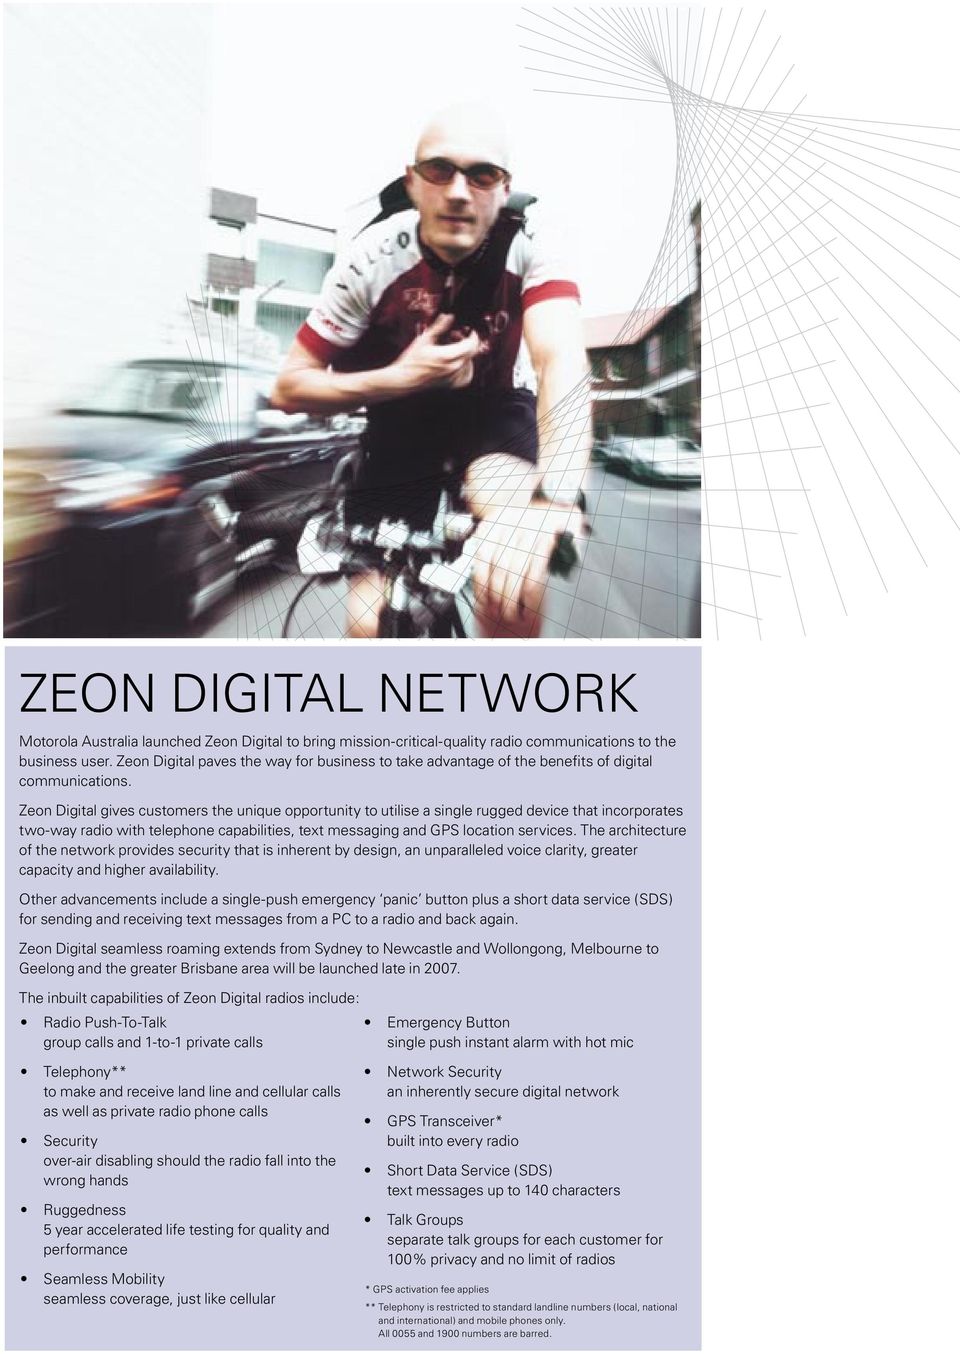 Zeon Digital gives customers the unique opportunity to utilise a single rugged device that incorporates two-way radio with telephone capabilities, text messaging and GPS location services.